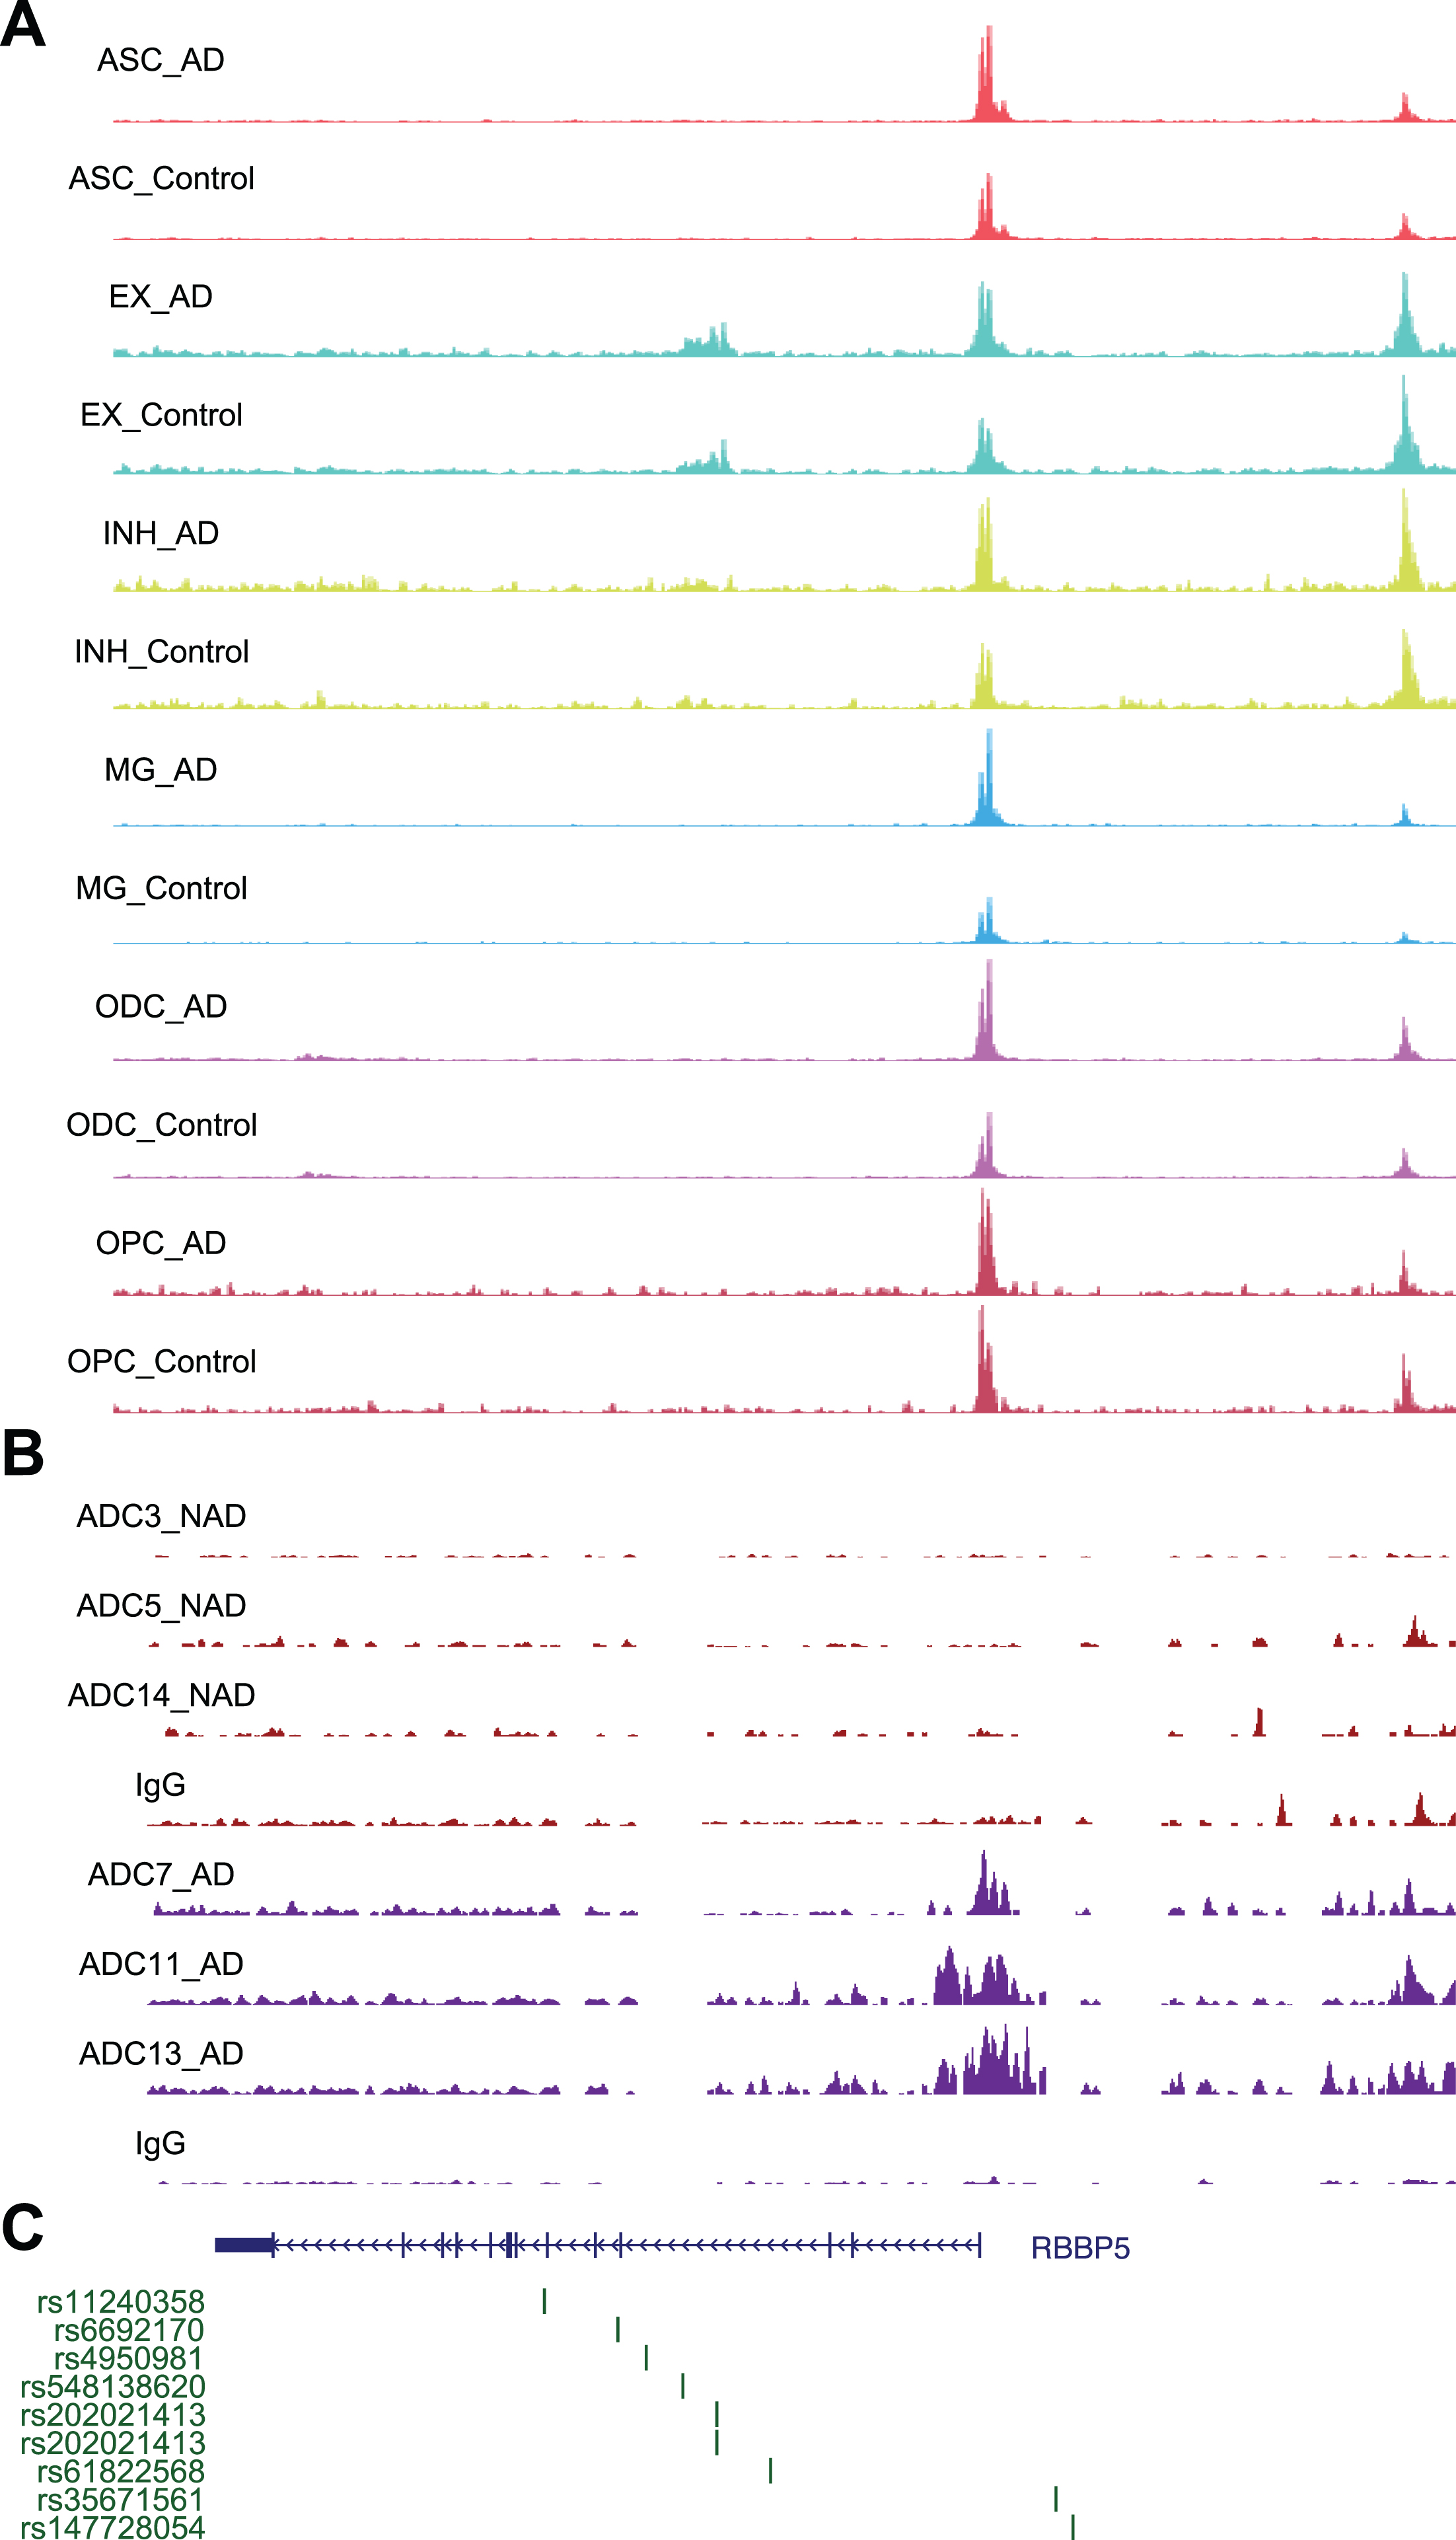 Chromatin accessibility, DSB sites, and GWAS for RBBP5. A) Representative image showing chromosome accessibility from single nuclei ATAC-seq datasets in the RBBP5 gene locus. B) Representative image showing identified peaks binding in the RBBP5 gene locus from AD and ND. C) AD GWAS statistics from Jansen et al. for SNPs at RBBP5 locus are shown.